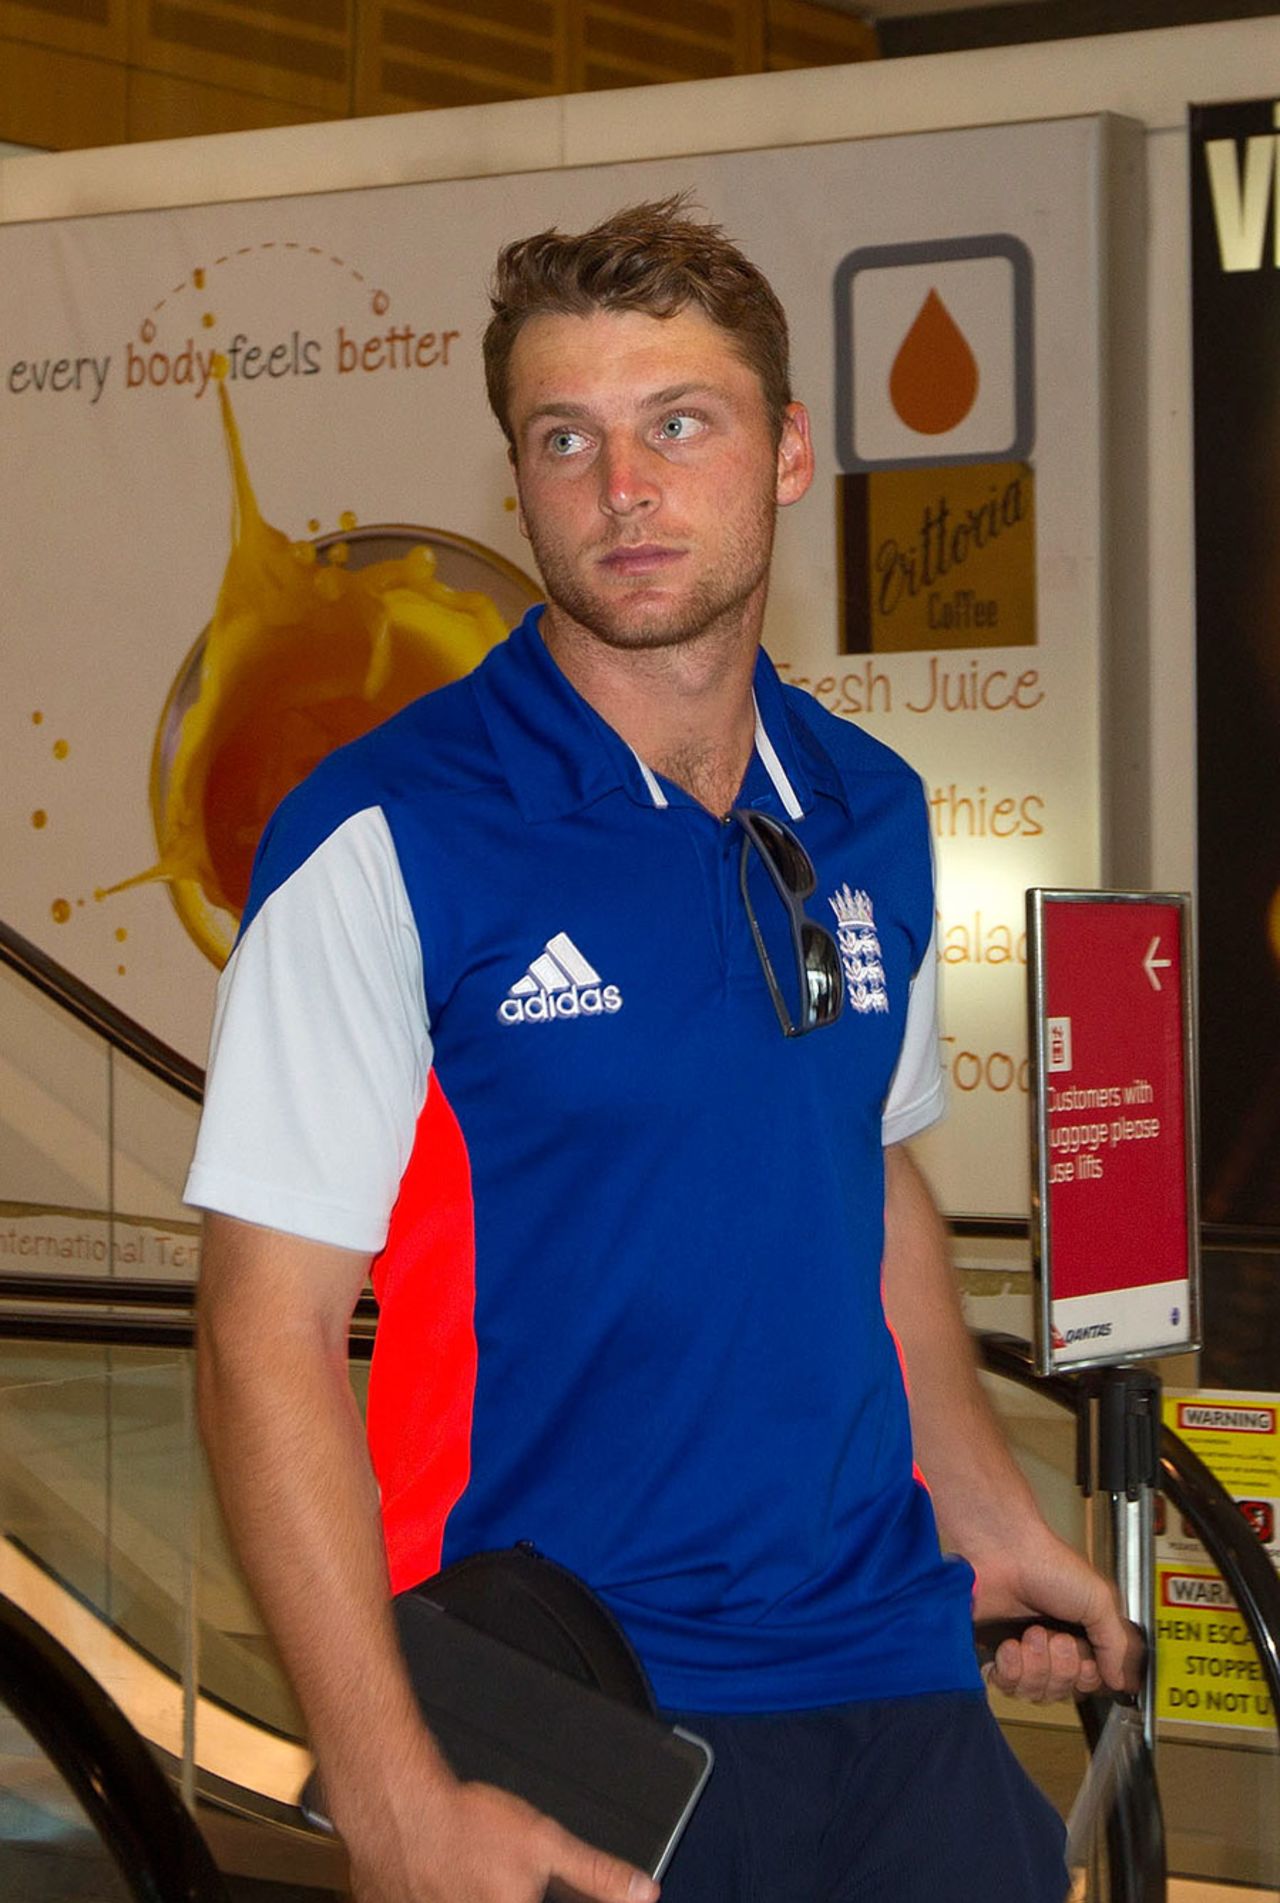 Jos Buttler might need more than a fresh juice to feel better, World Cup 2015, Sydney, March 10, 2015